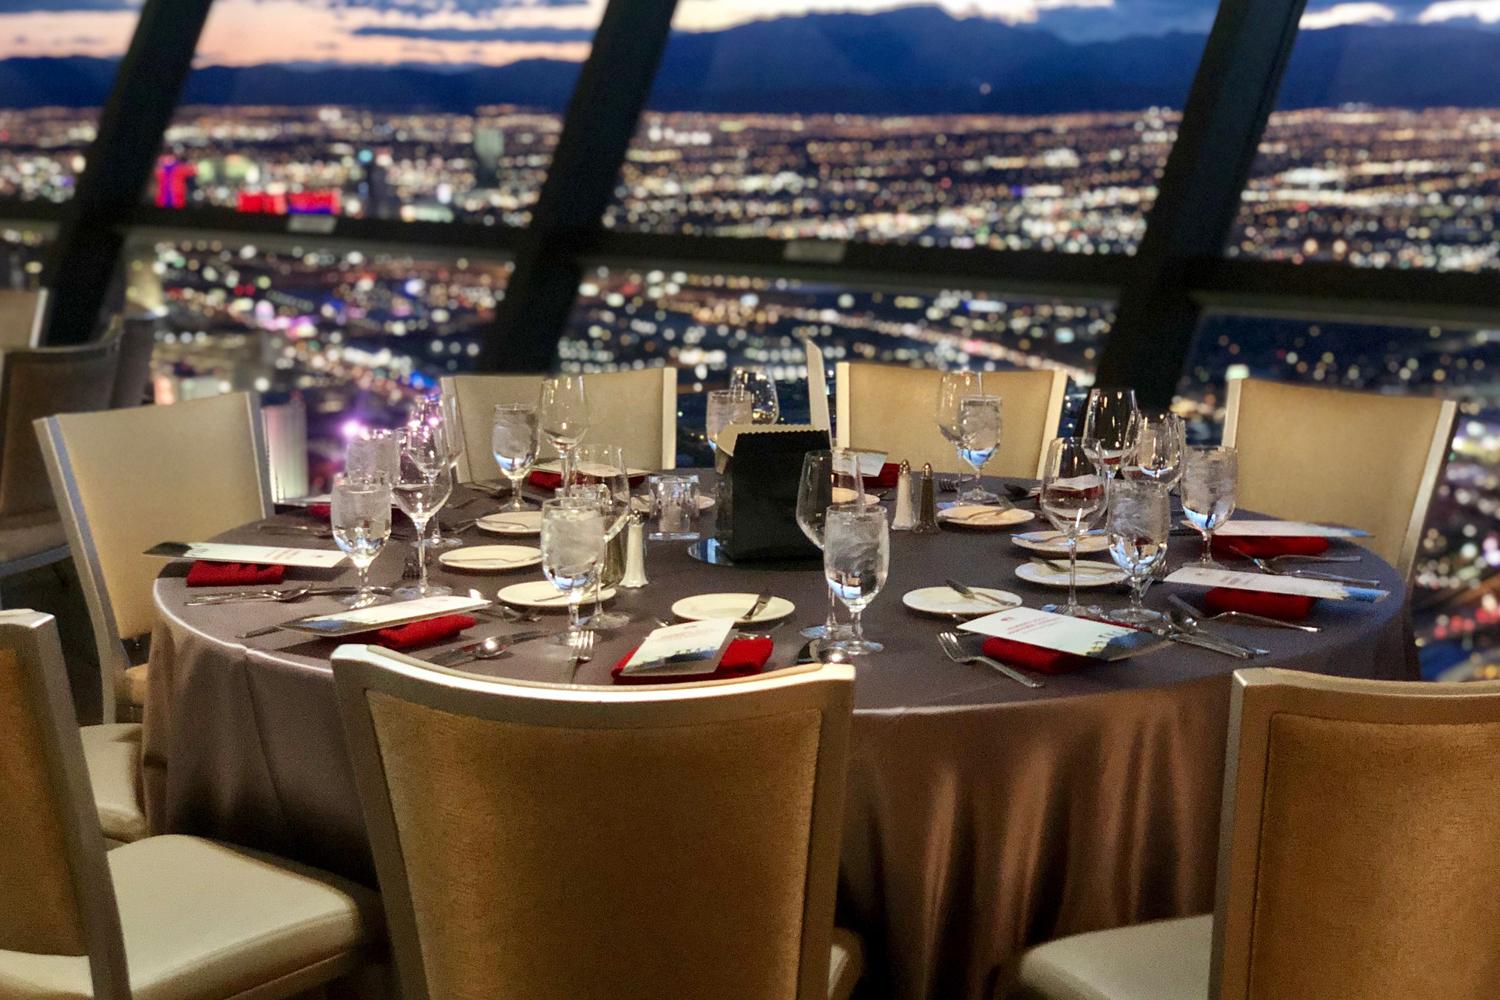 The STRAT Tower observation deck table set for a private dinner with a view of Las Vegas valley